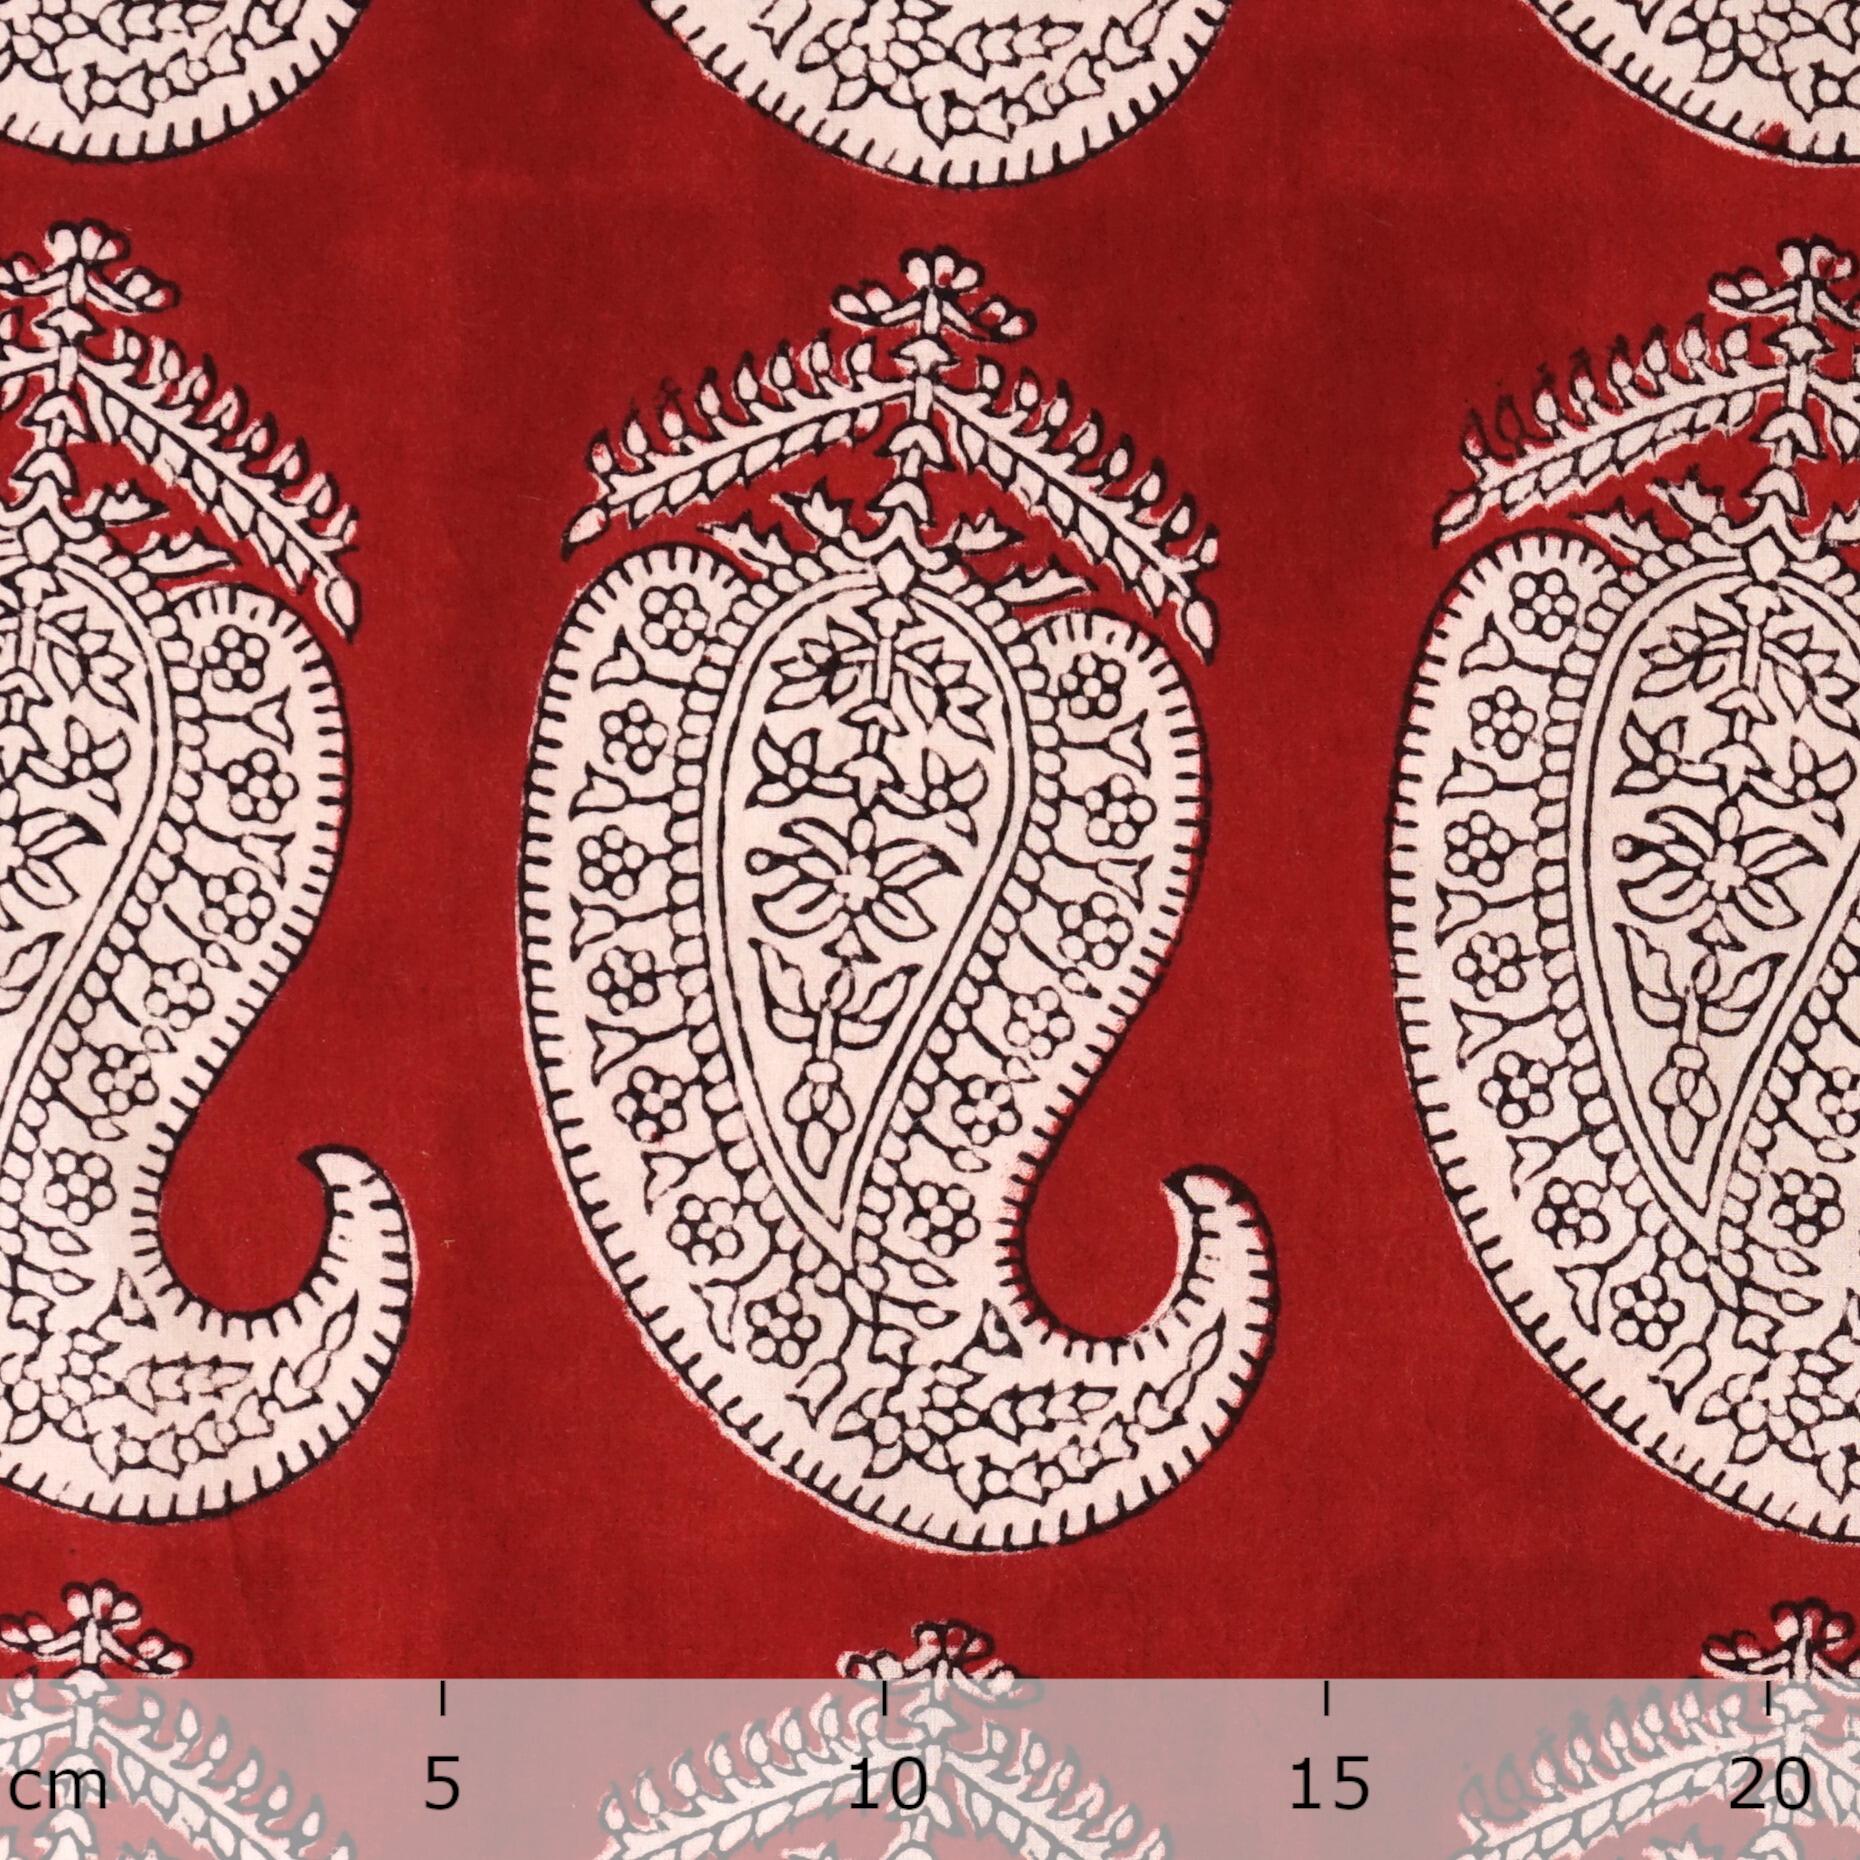 100% Block-Printed Cotton Fabric From India - Breadfruit Design - Iron Rust Black & Alizarin Red Dyes - Ruler